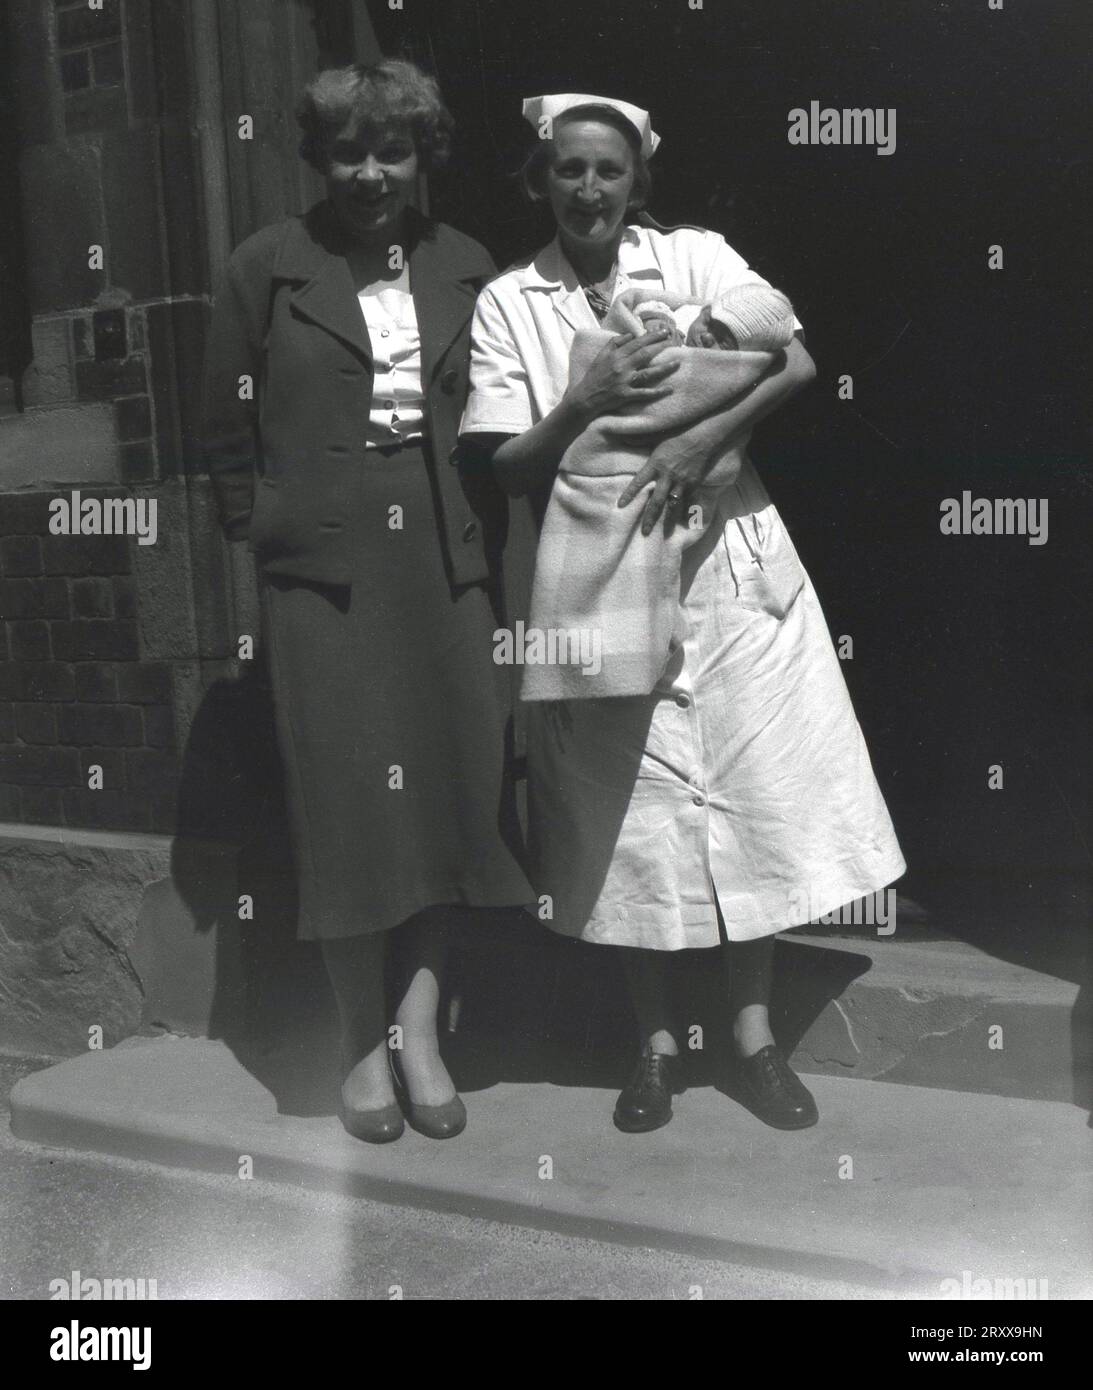 1960s, historical, summertime and at the entrance to a stone built buidling, a nurse holding a new baby, standing outside for a photo with its new mother, Manchester, England, UK. Stock Photo